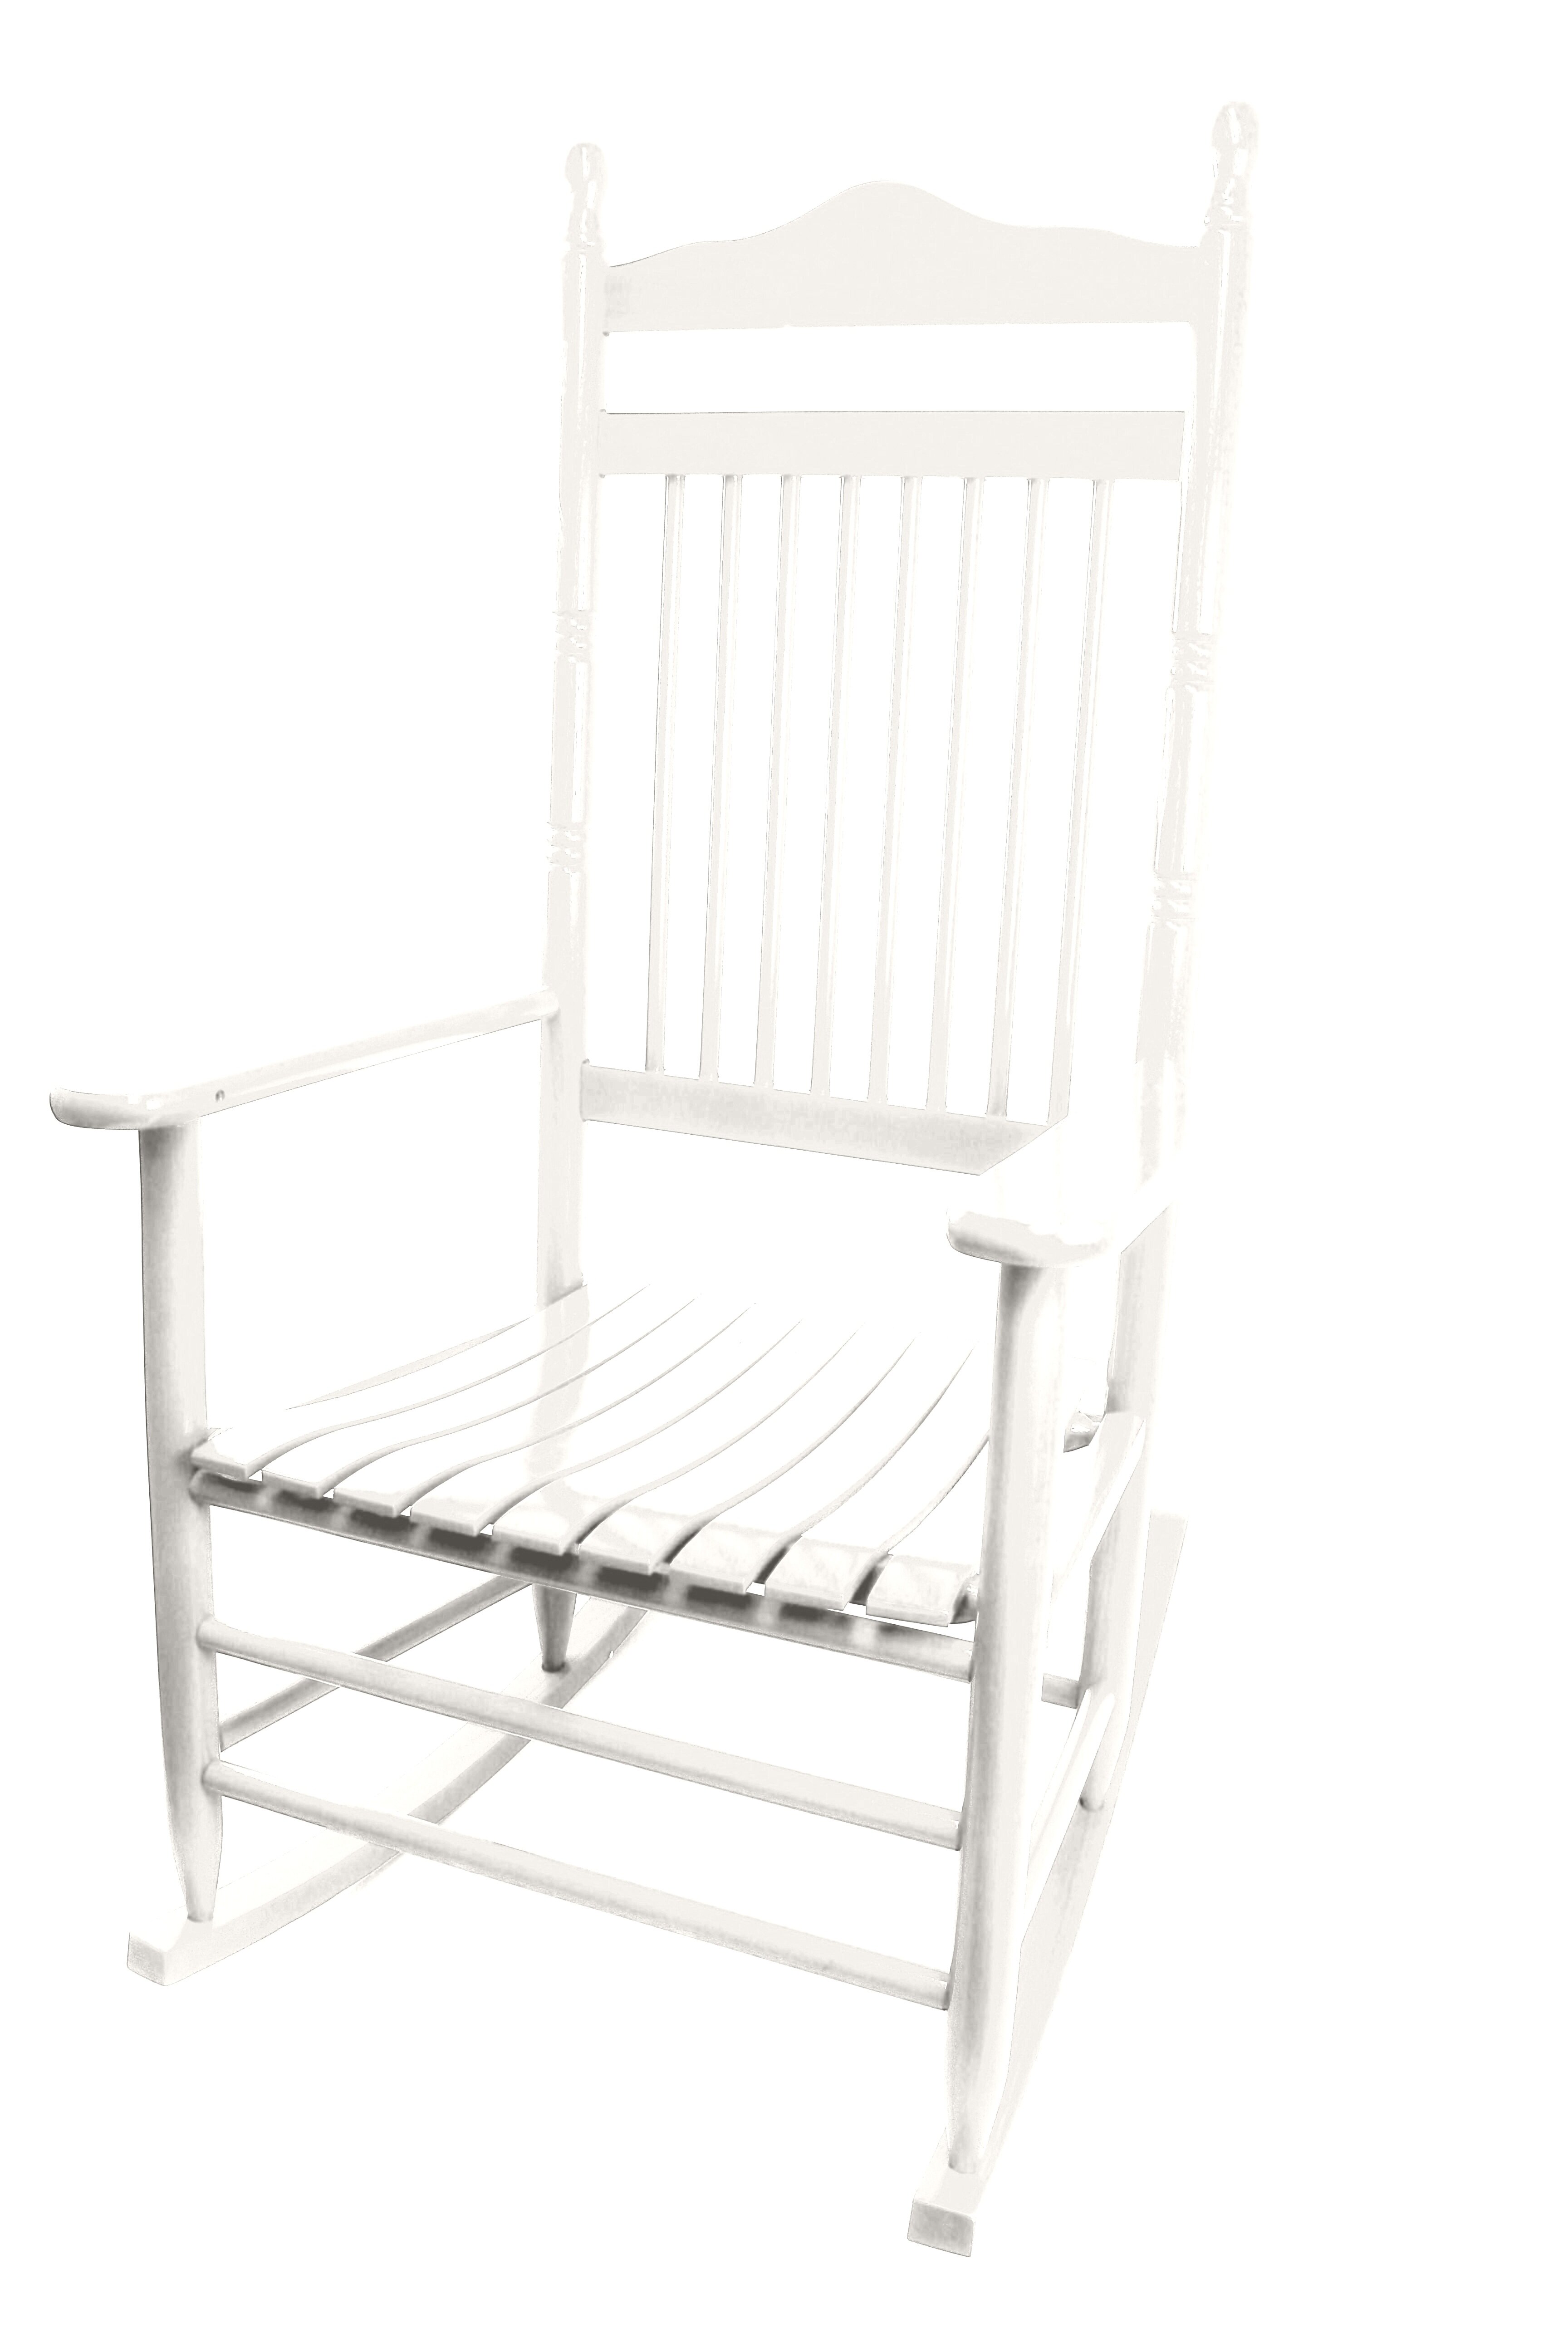 Gracie Oaks Outdoor Pelkey Rocking Solid + Manufactured Wood Chair ...